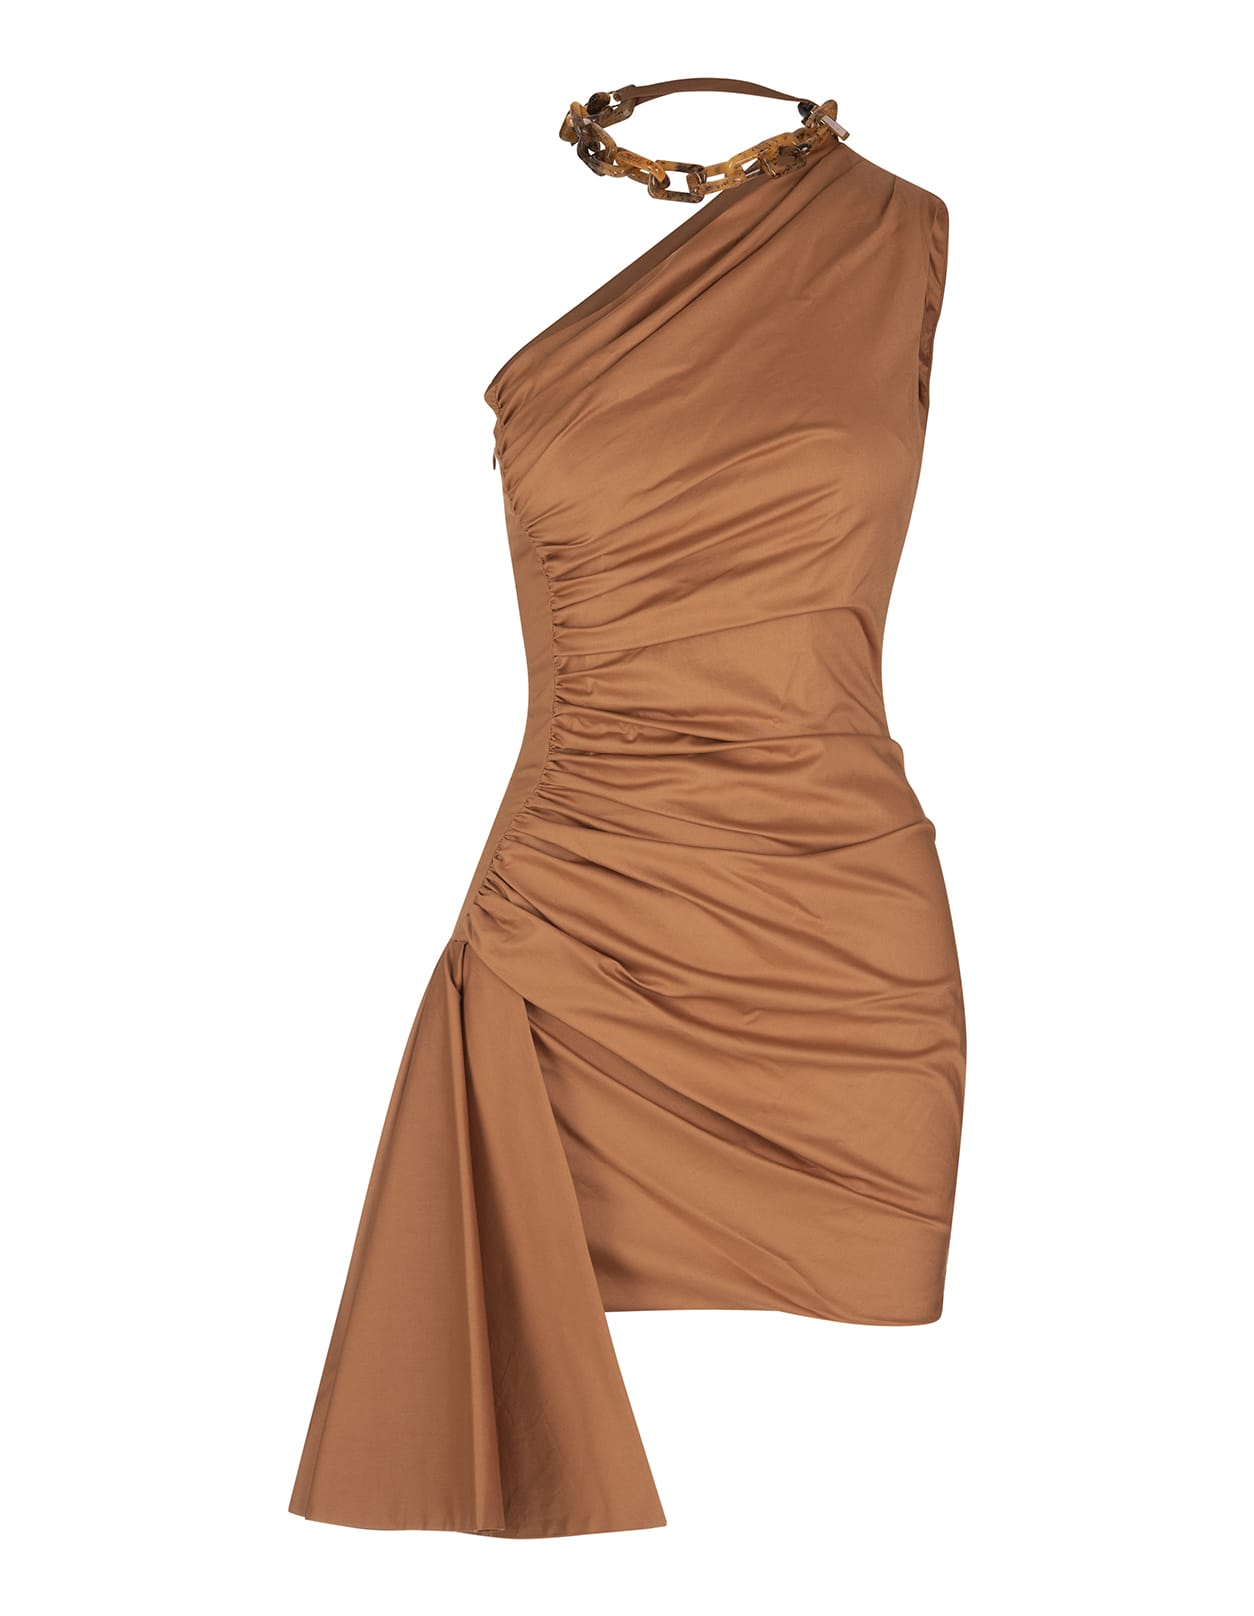 Giuseppe di Morabito Short Camel One Shoulder Dress With Draping And Chain Detail